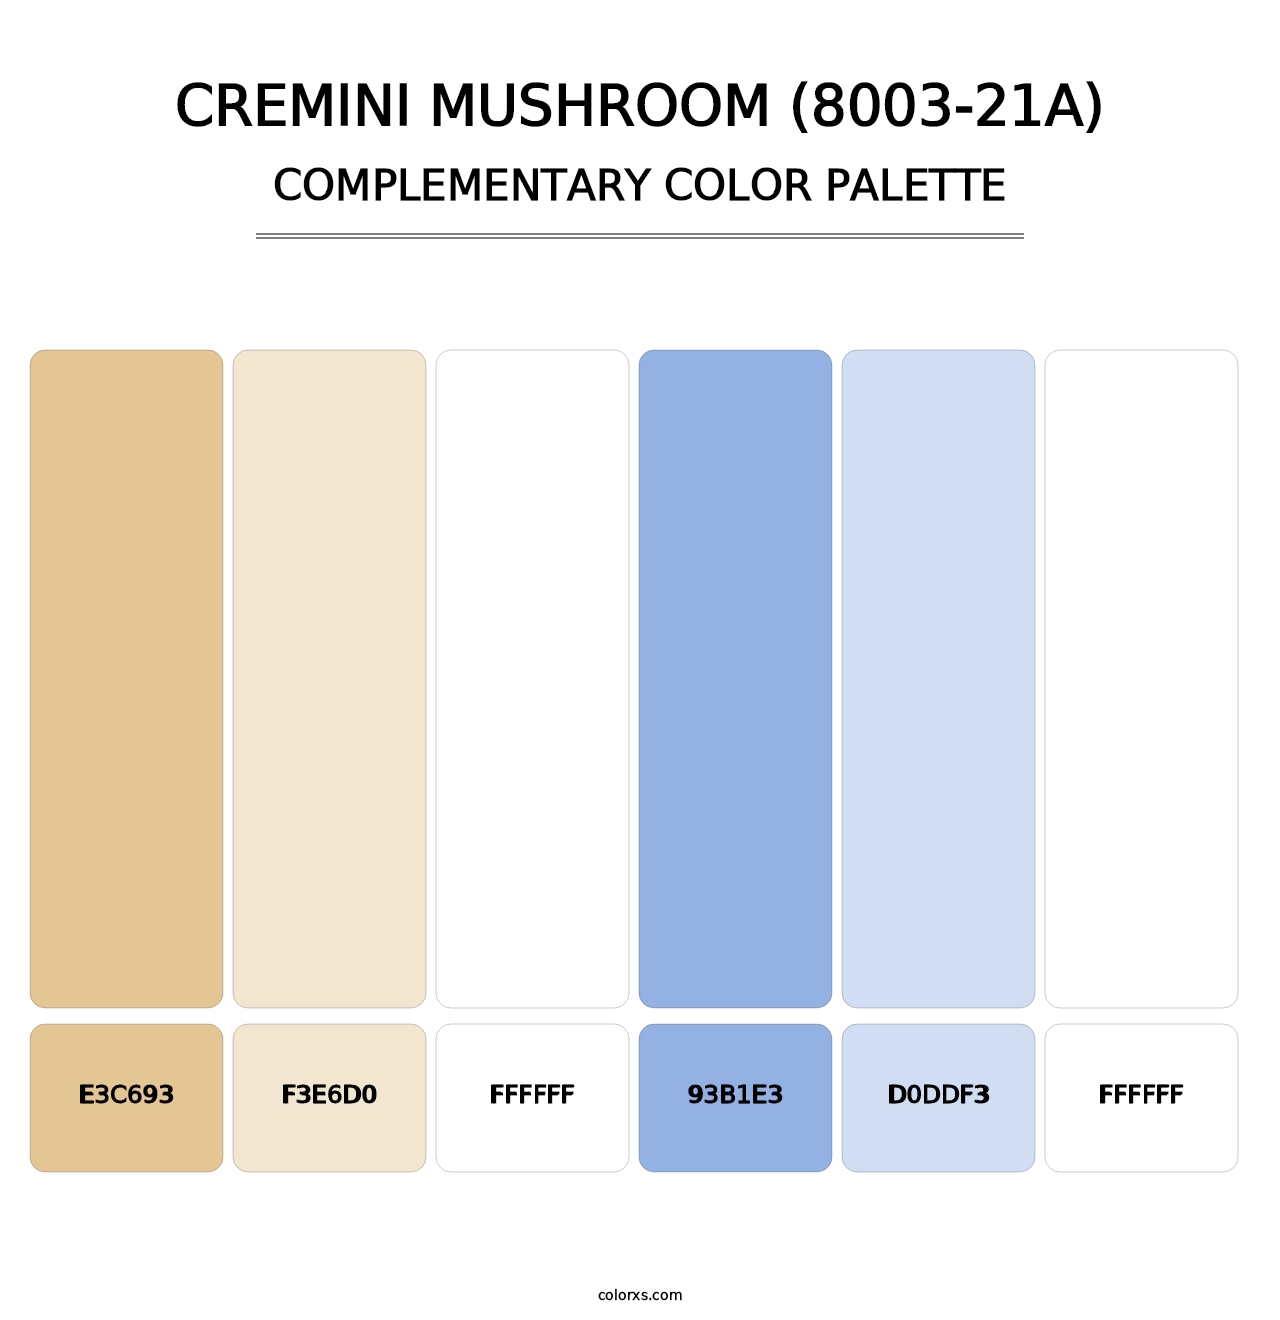 Cremini Mushroom (8003-21A) - Complementary Color Palette